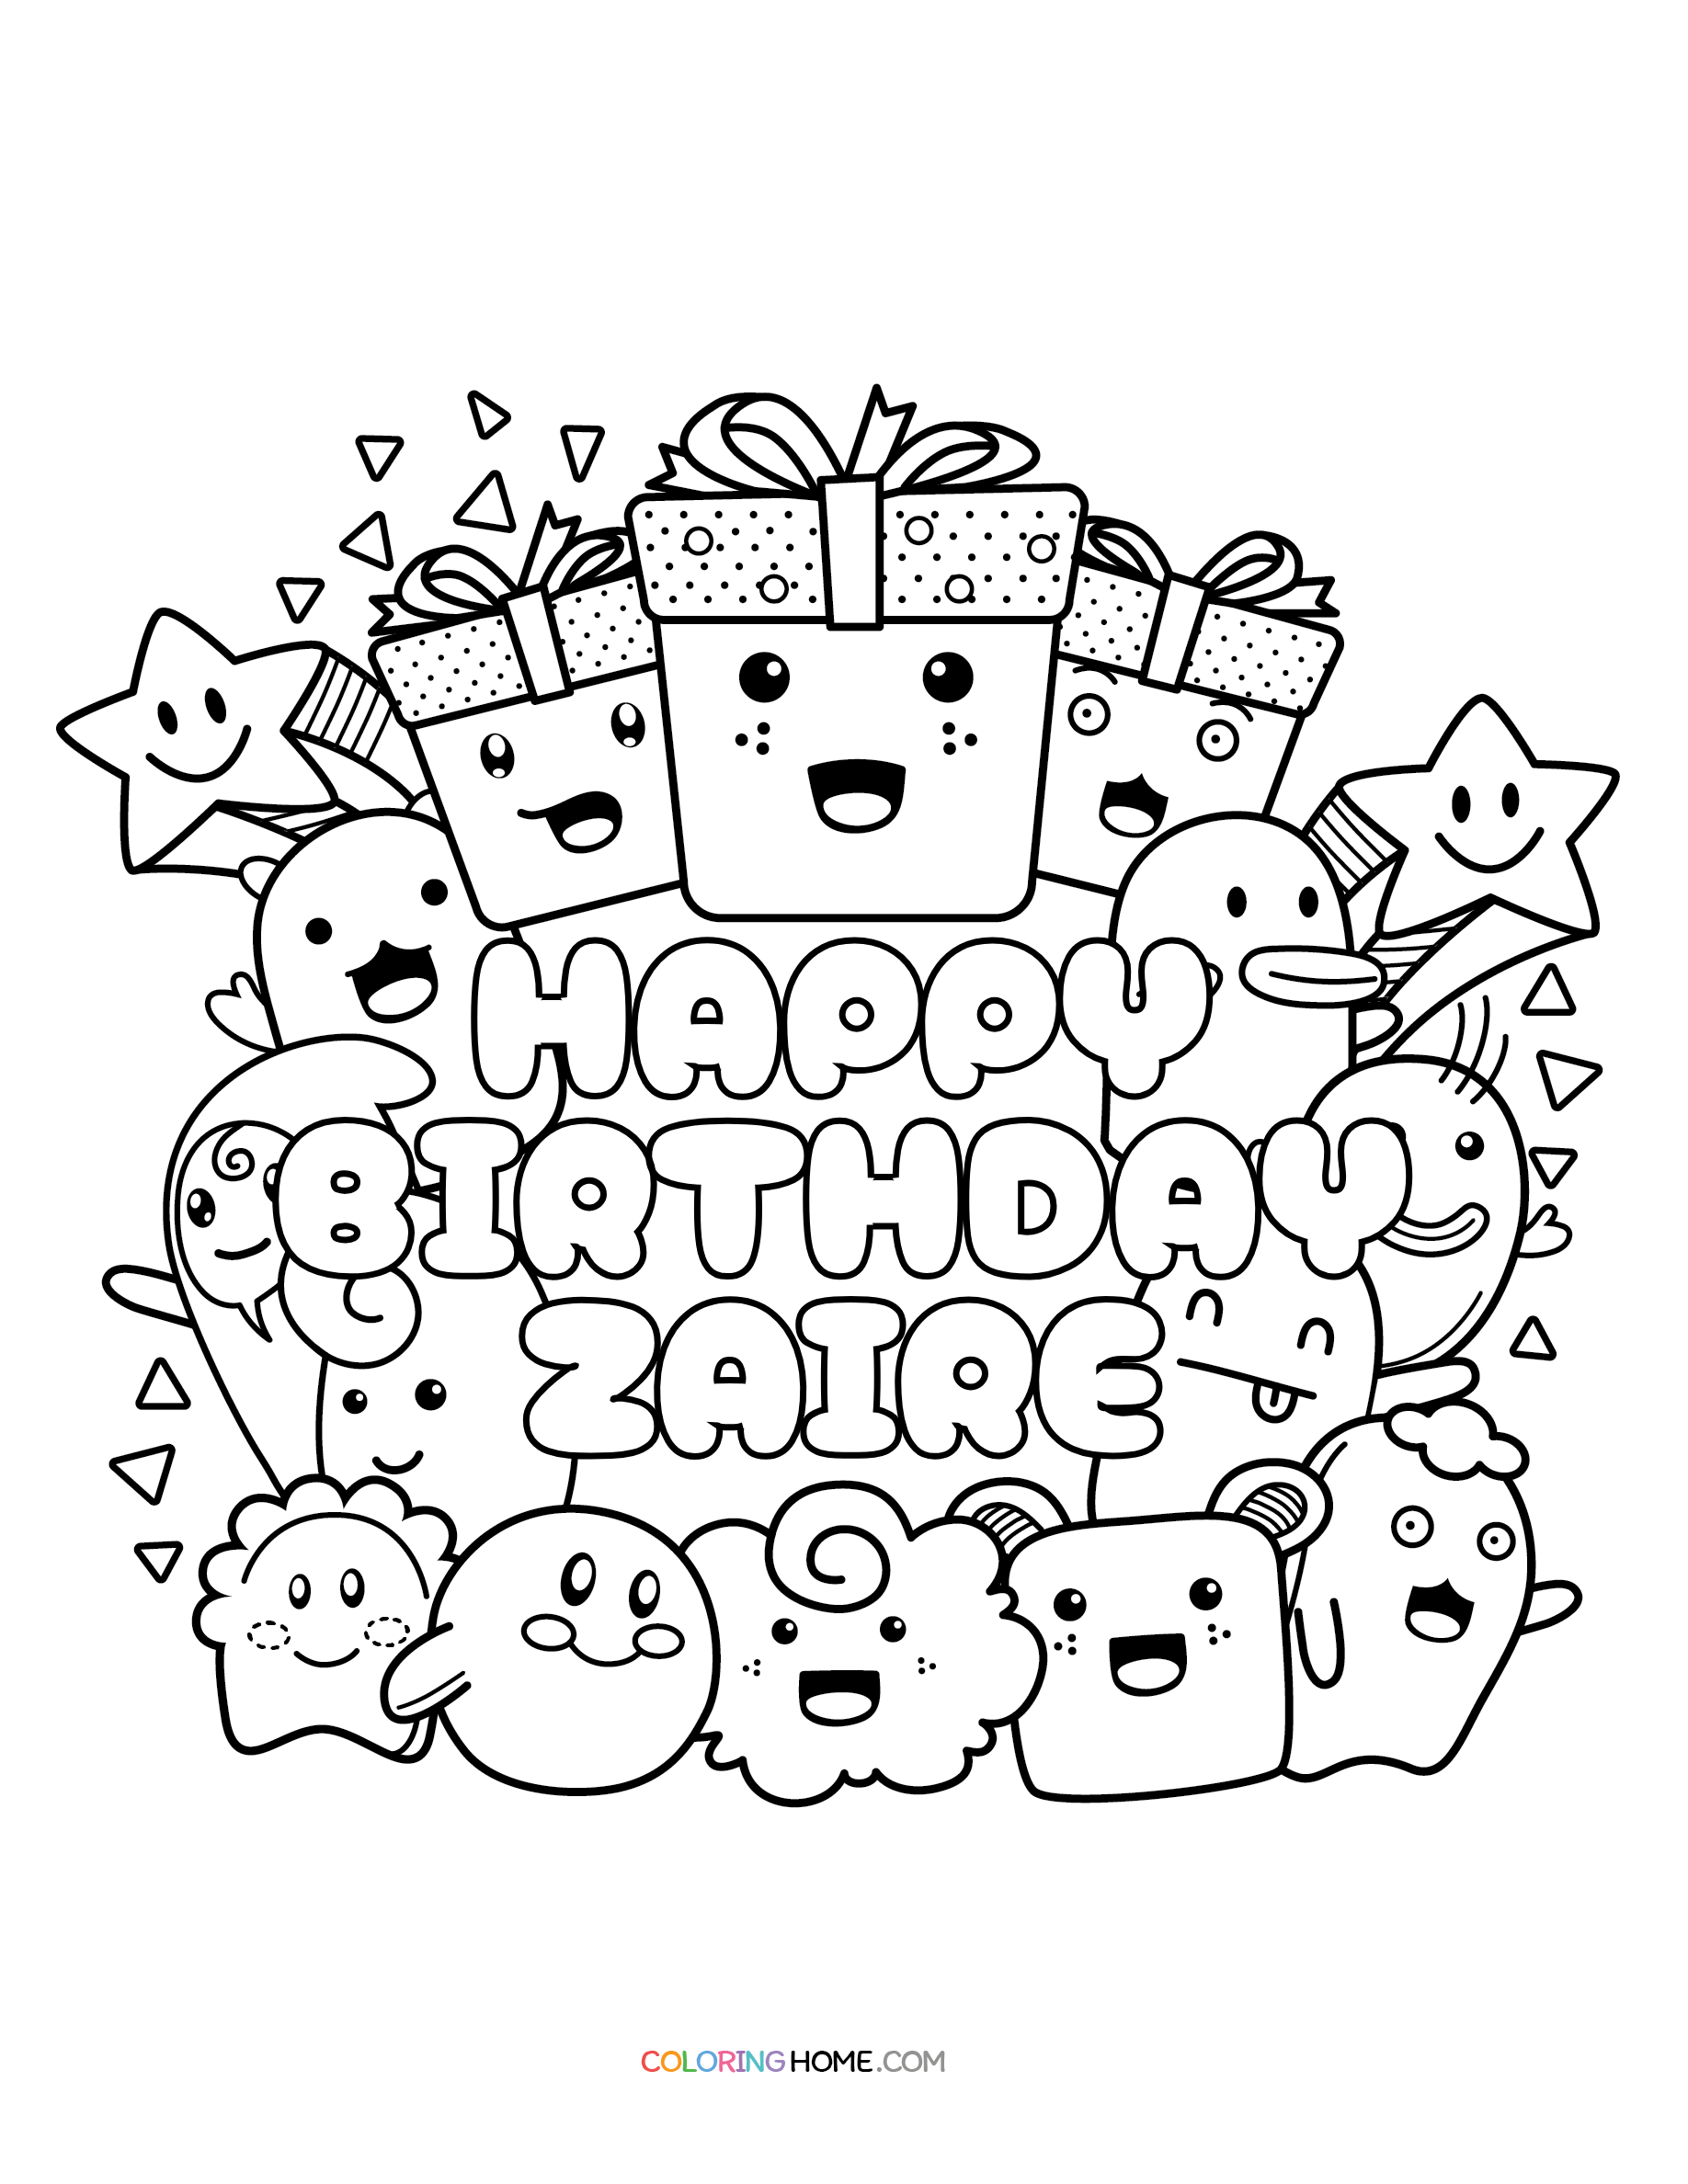 Happy Birthday Zaire coloring page